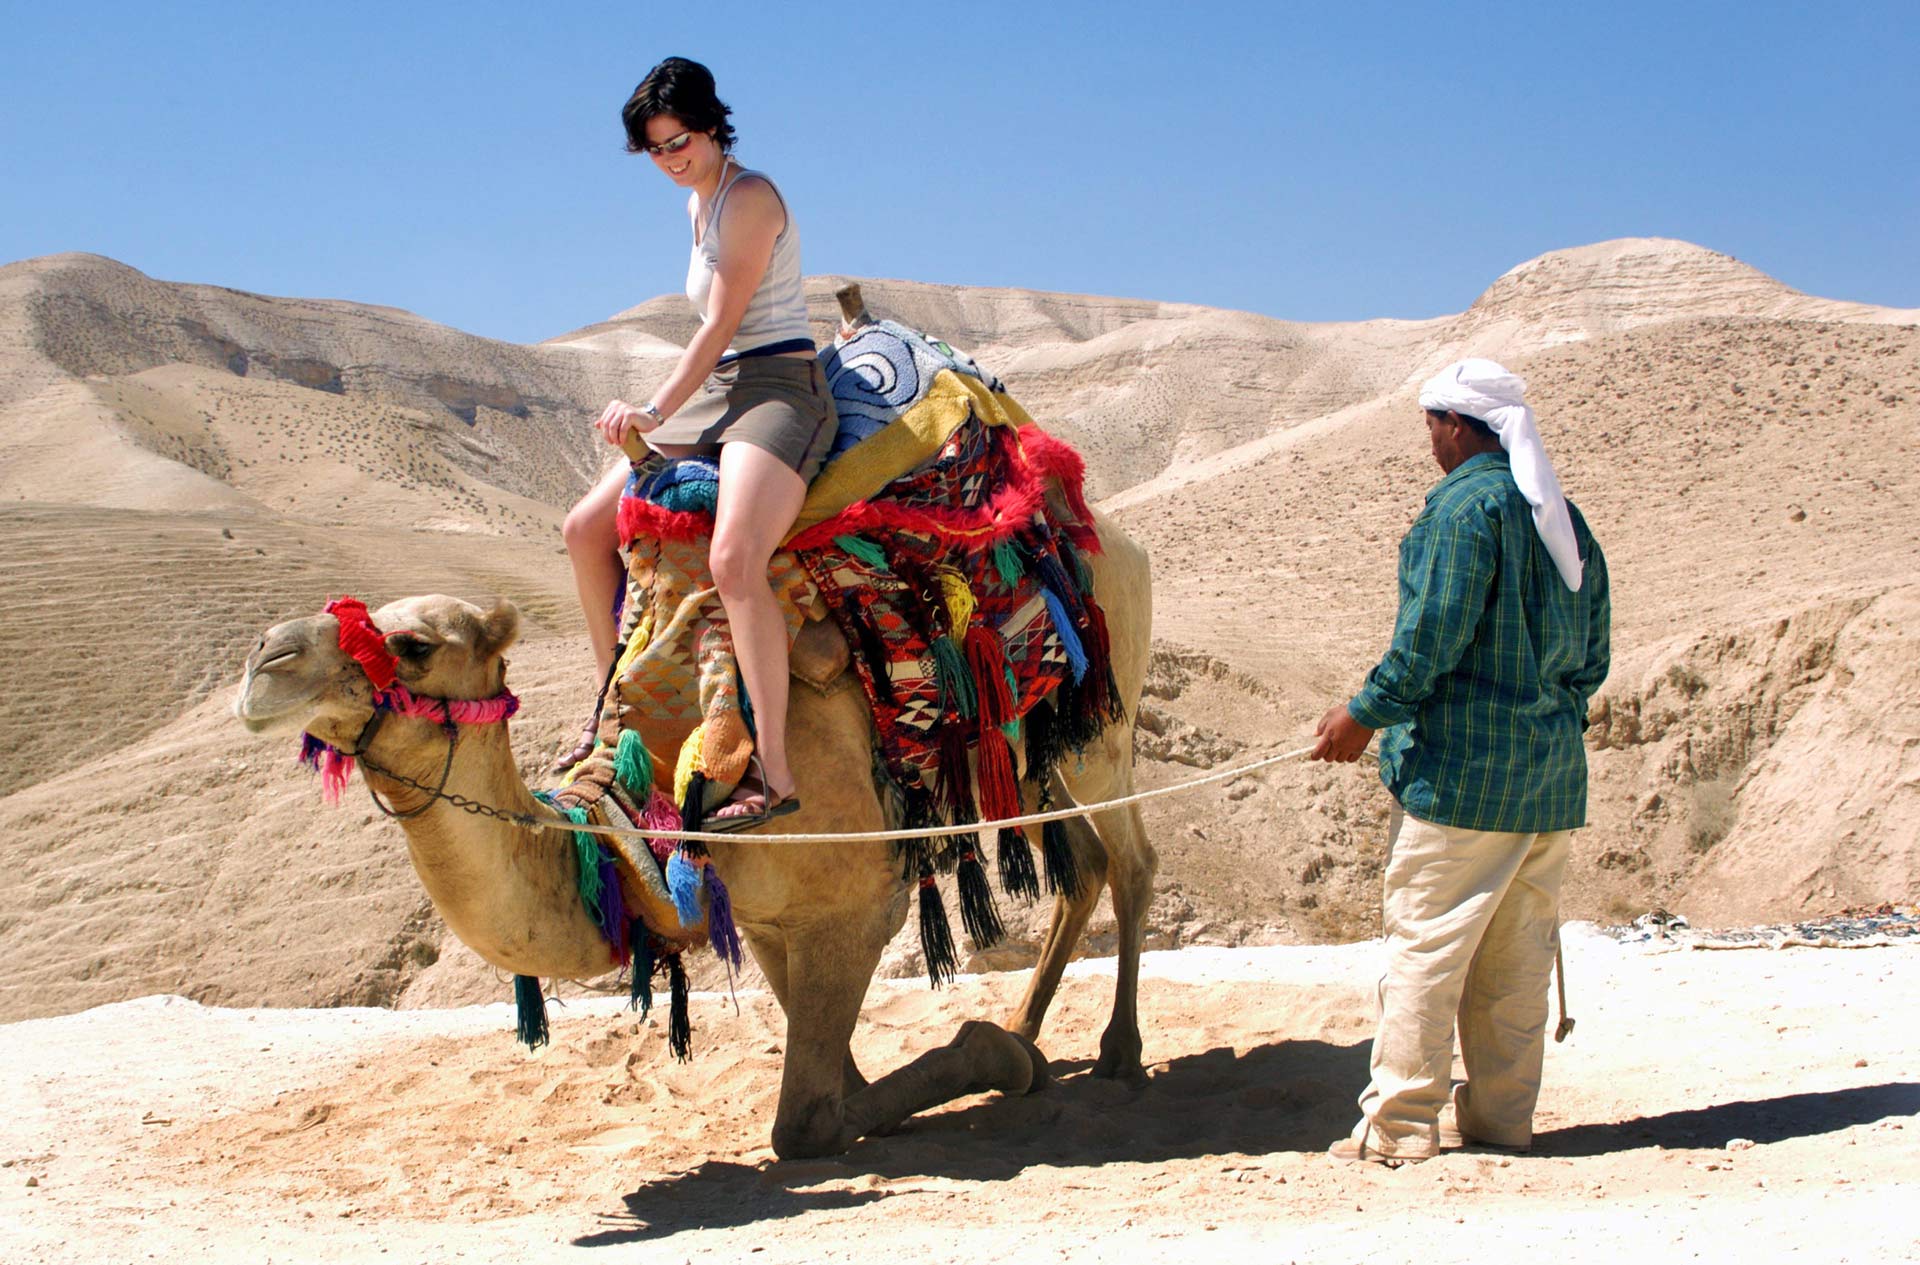 Tourist rides a camel of a Bedouin man in the Desert